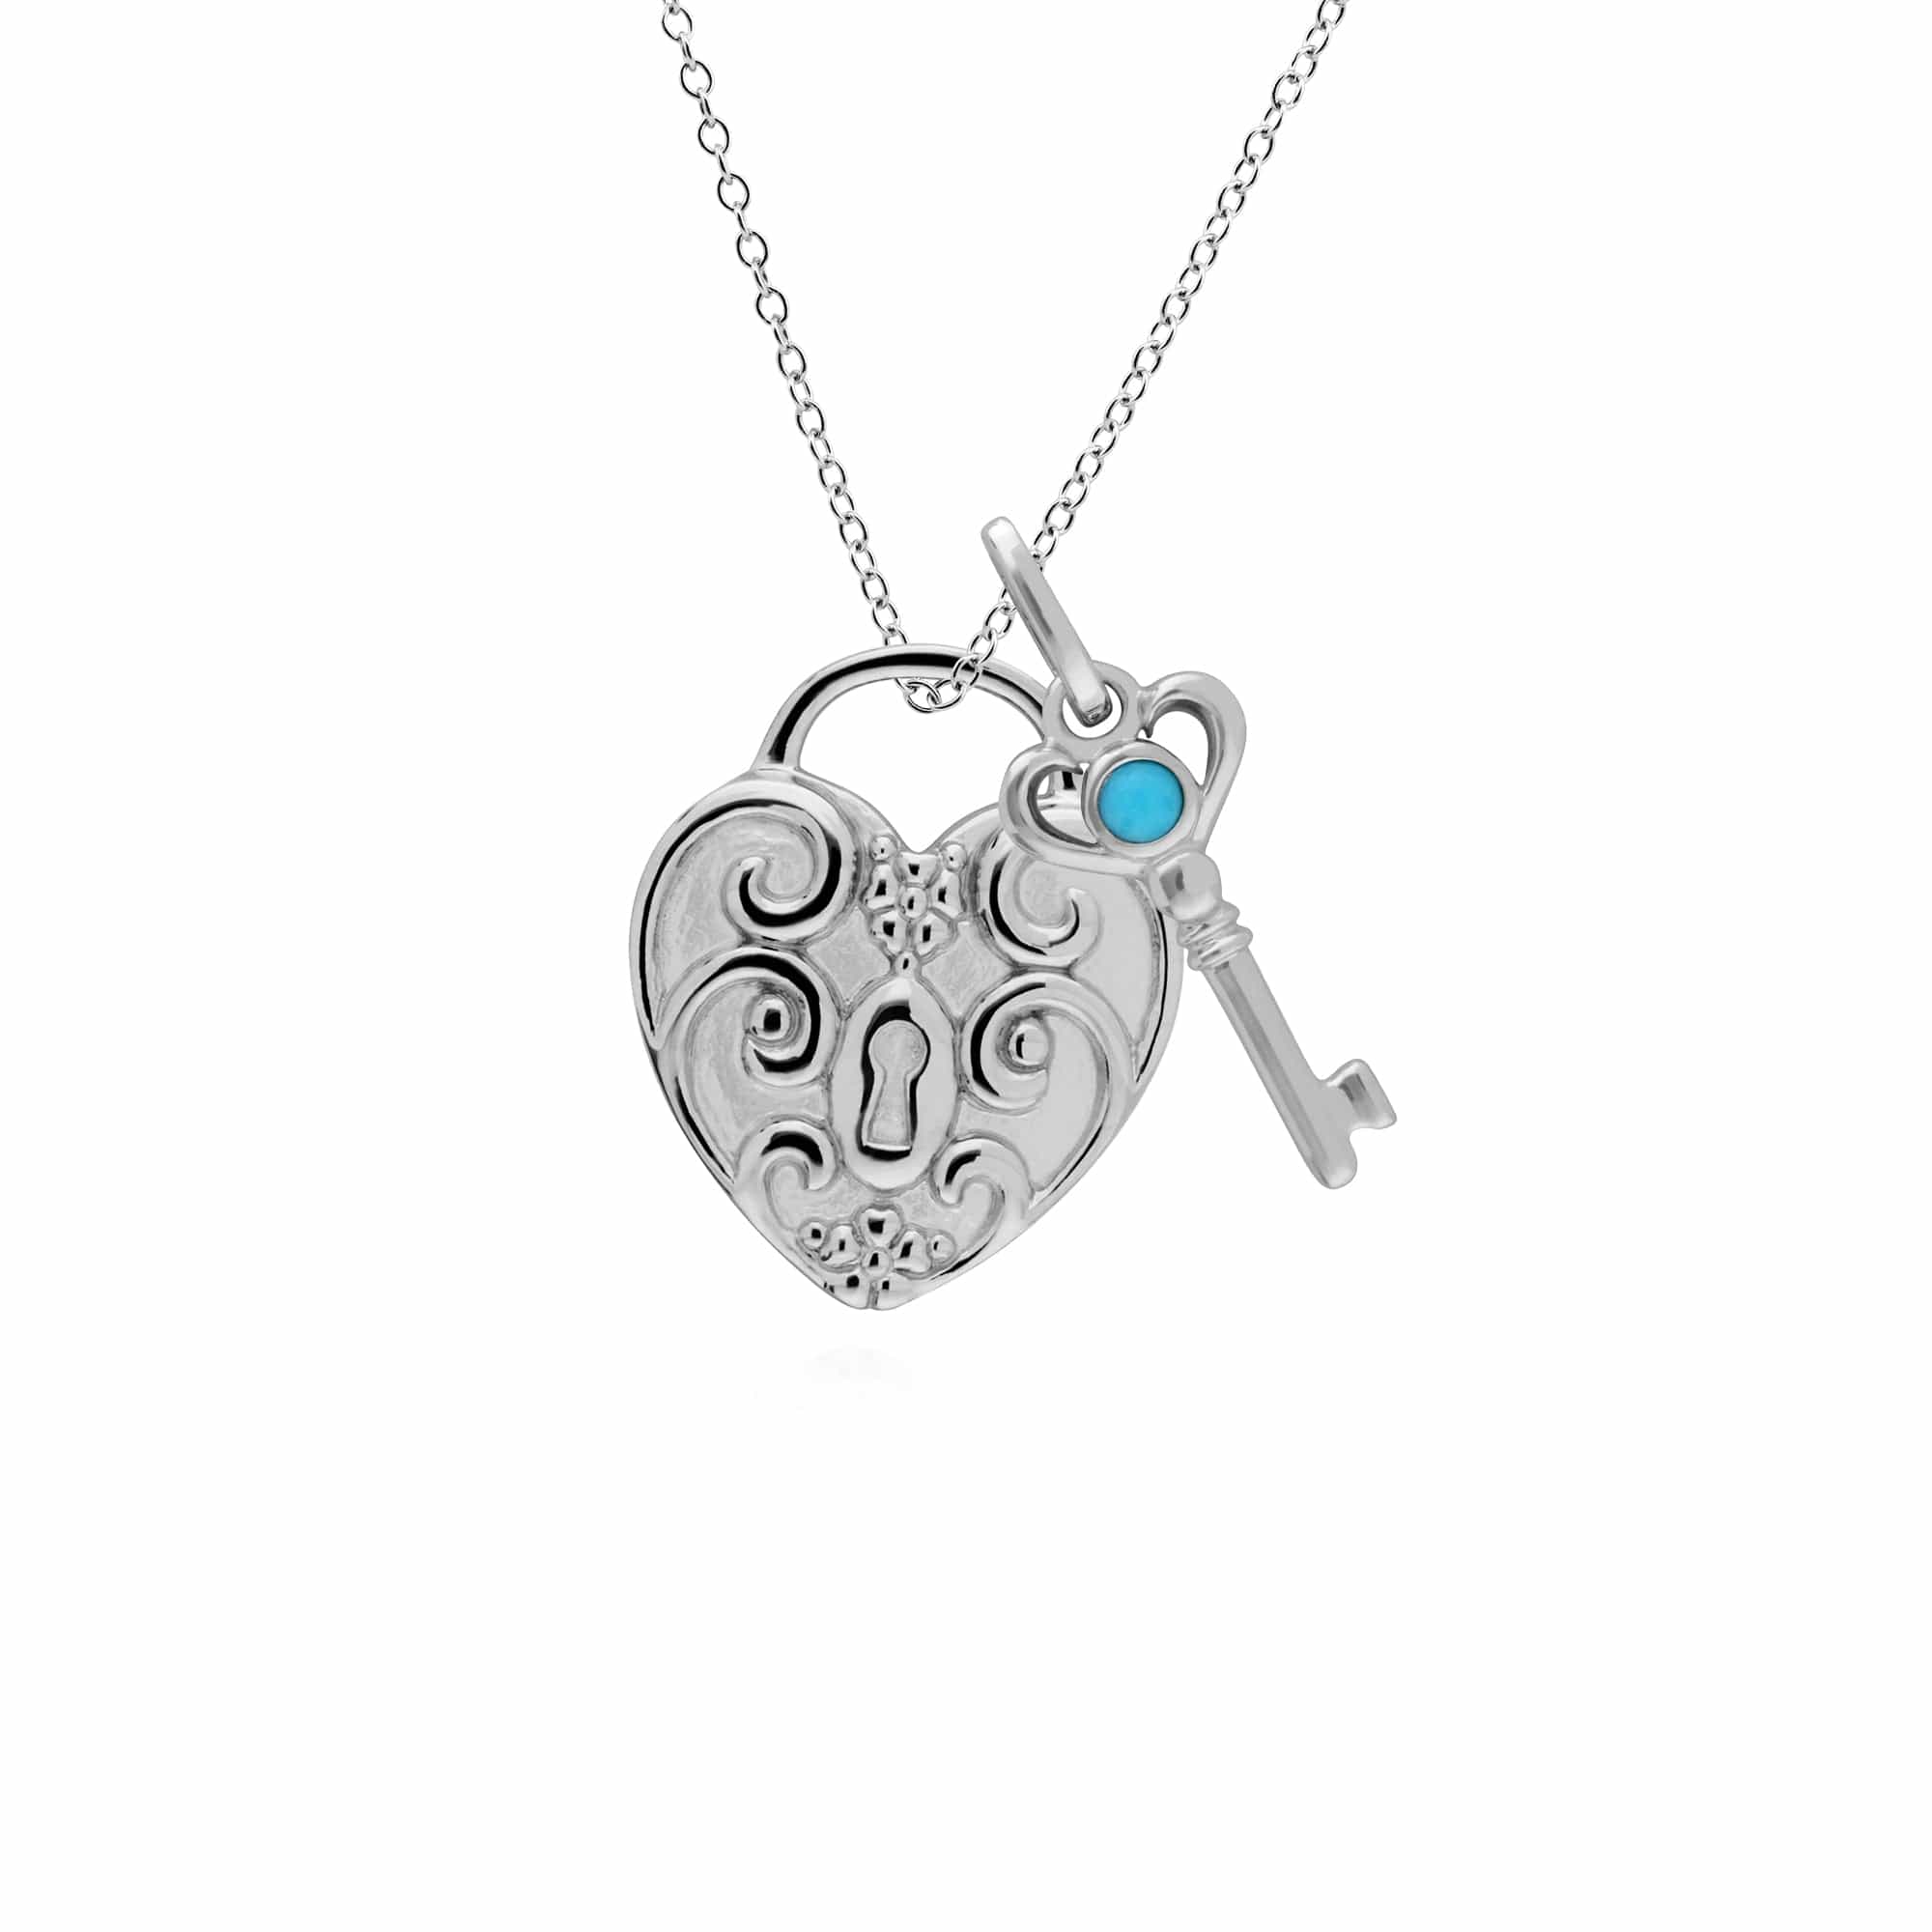 270P028301925-270P026601925 Classic Swirl Heart Lock Pendant & Turquoise Key Charm in 925 Sterling Silver 1